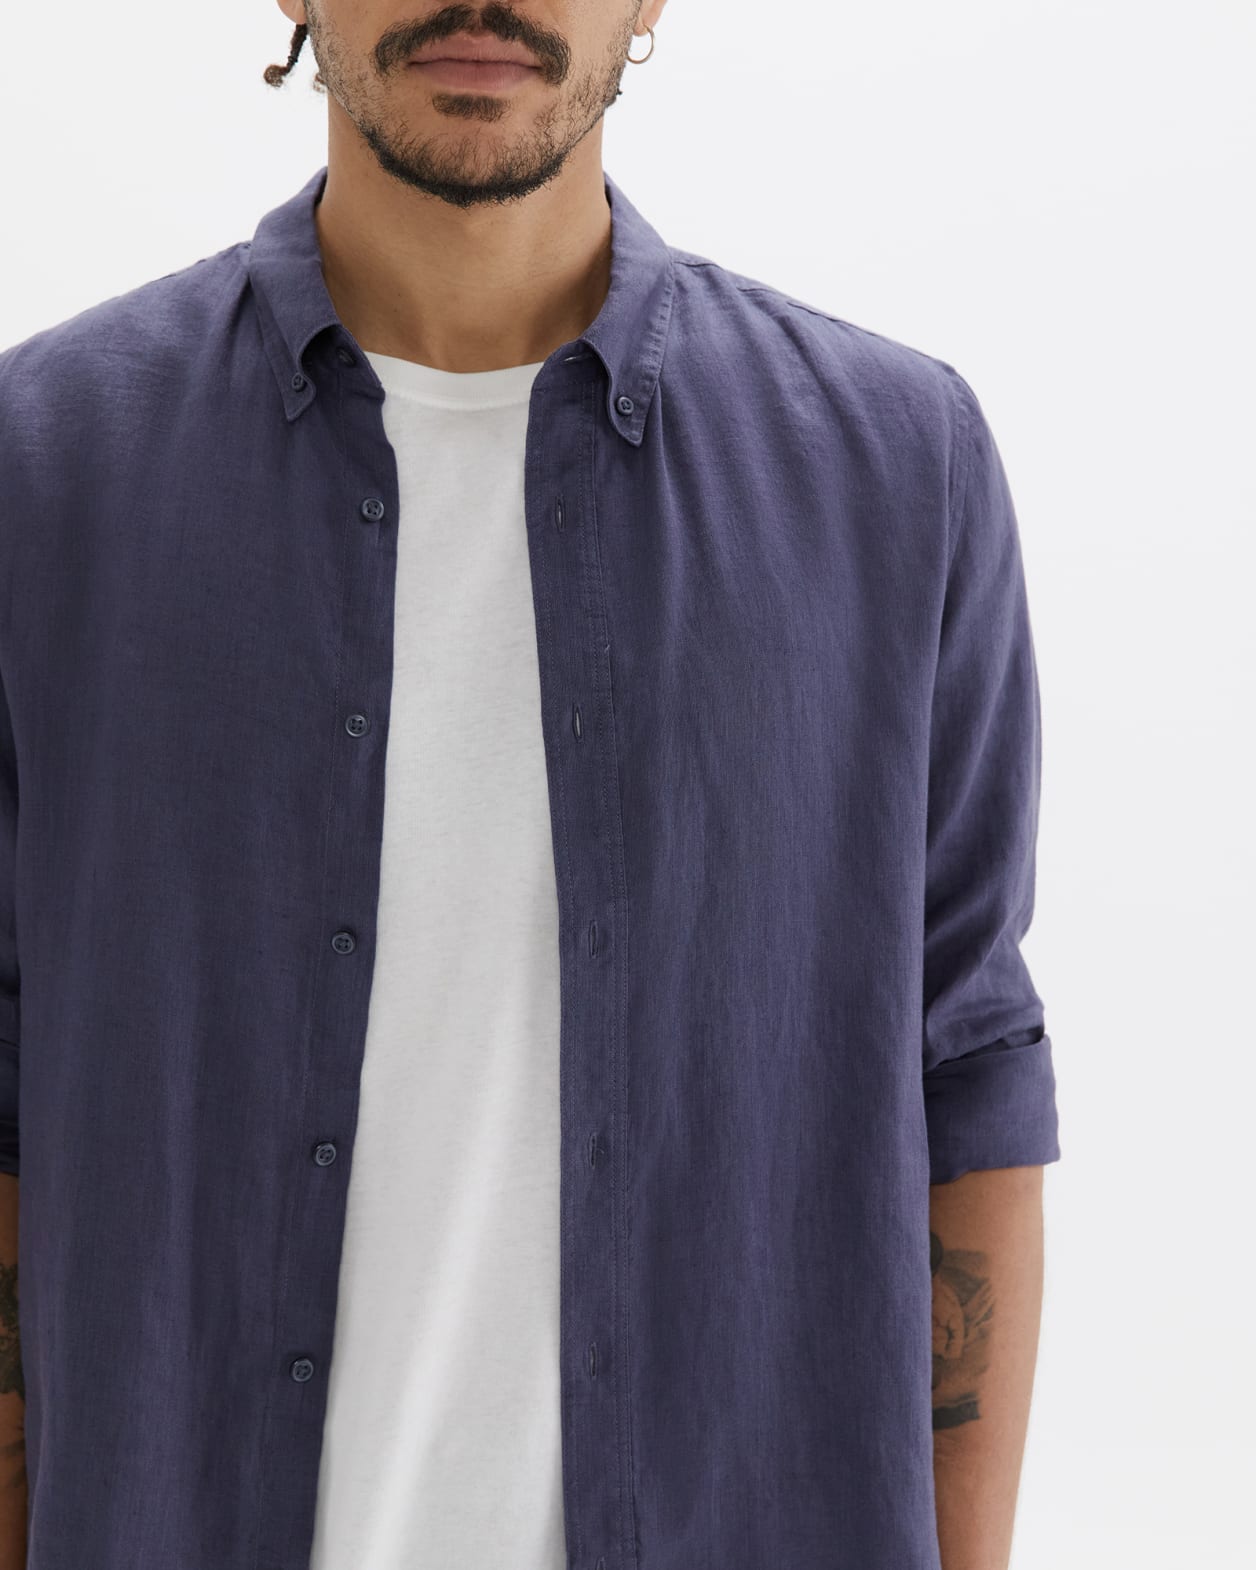 Hux Linen Shirt in WASHED INK